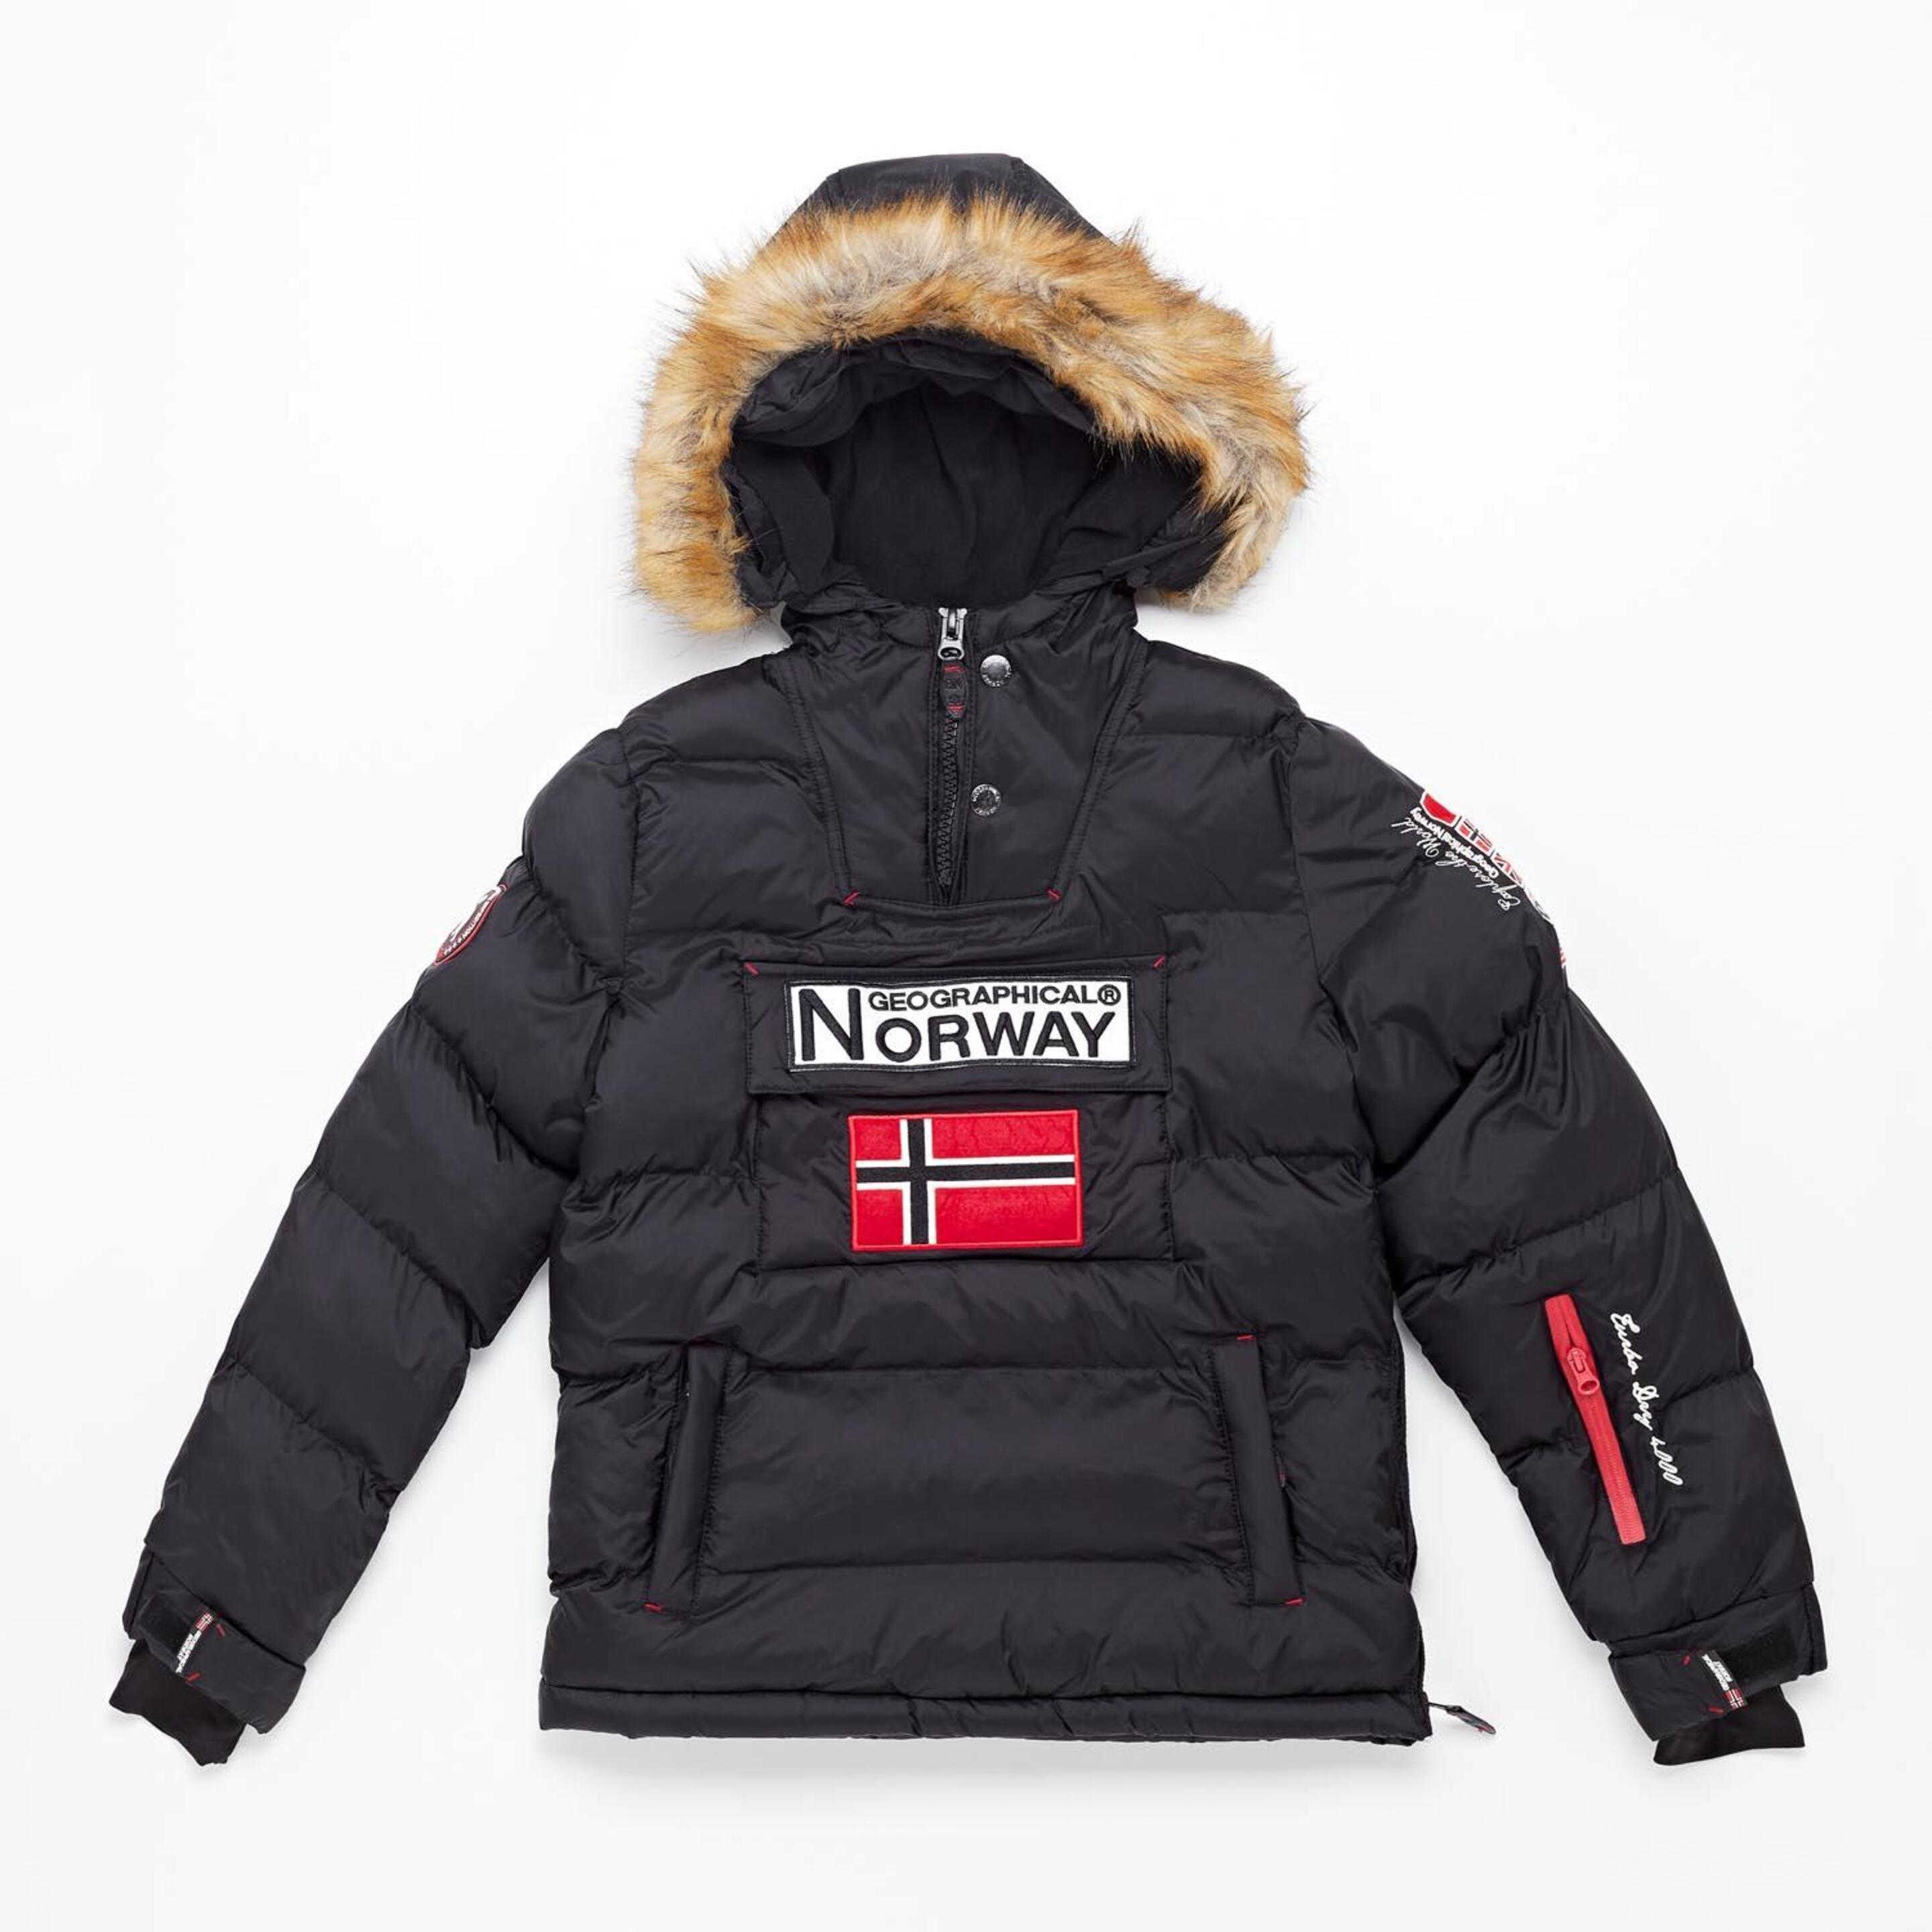 Geographical Norway Booker